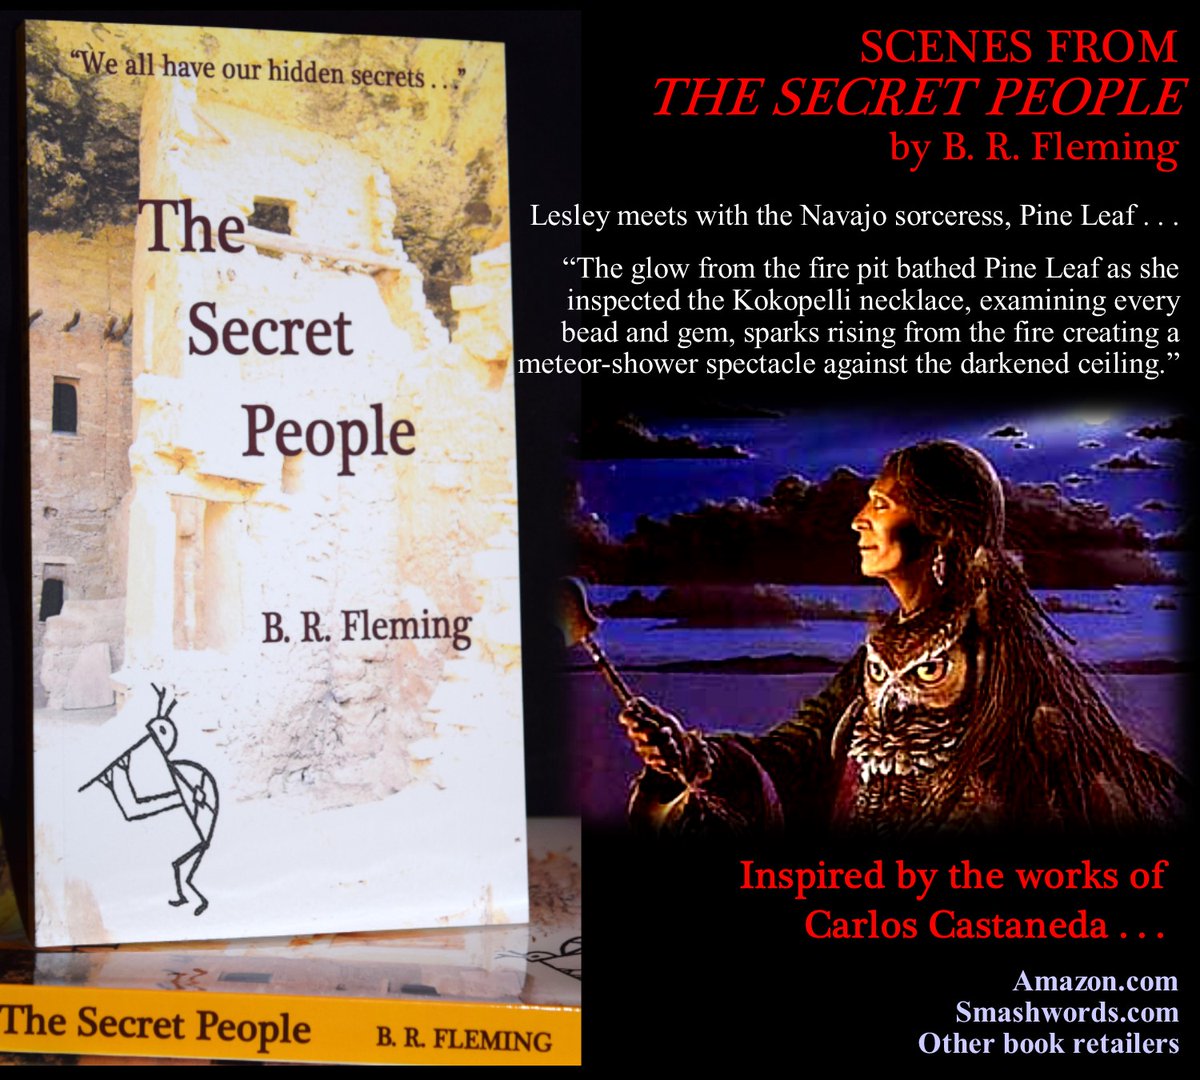 Scenes from #TheSecretPeople
Support #indieauthors #bookshop #BookTwitter #booknerd #BookClub #booklovers #love❤️#books #readersoftwitter #bookpromotion #BooksWorthReading #bookstoread #readerscommunity #readingcommunity #bookpromo #rtItBot #WritingCommunity #FridayFinds #FF ❤️💙